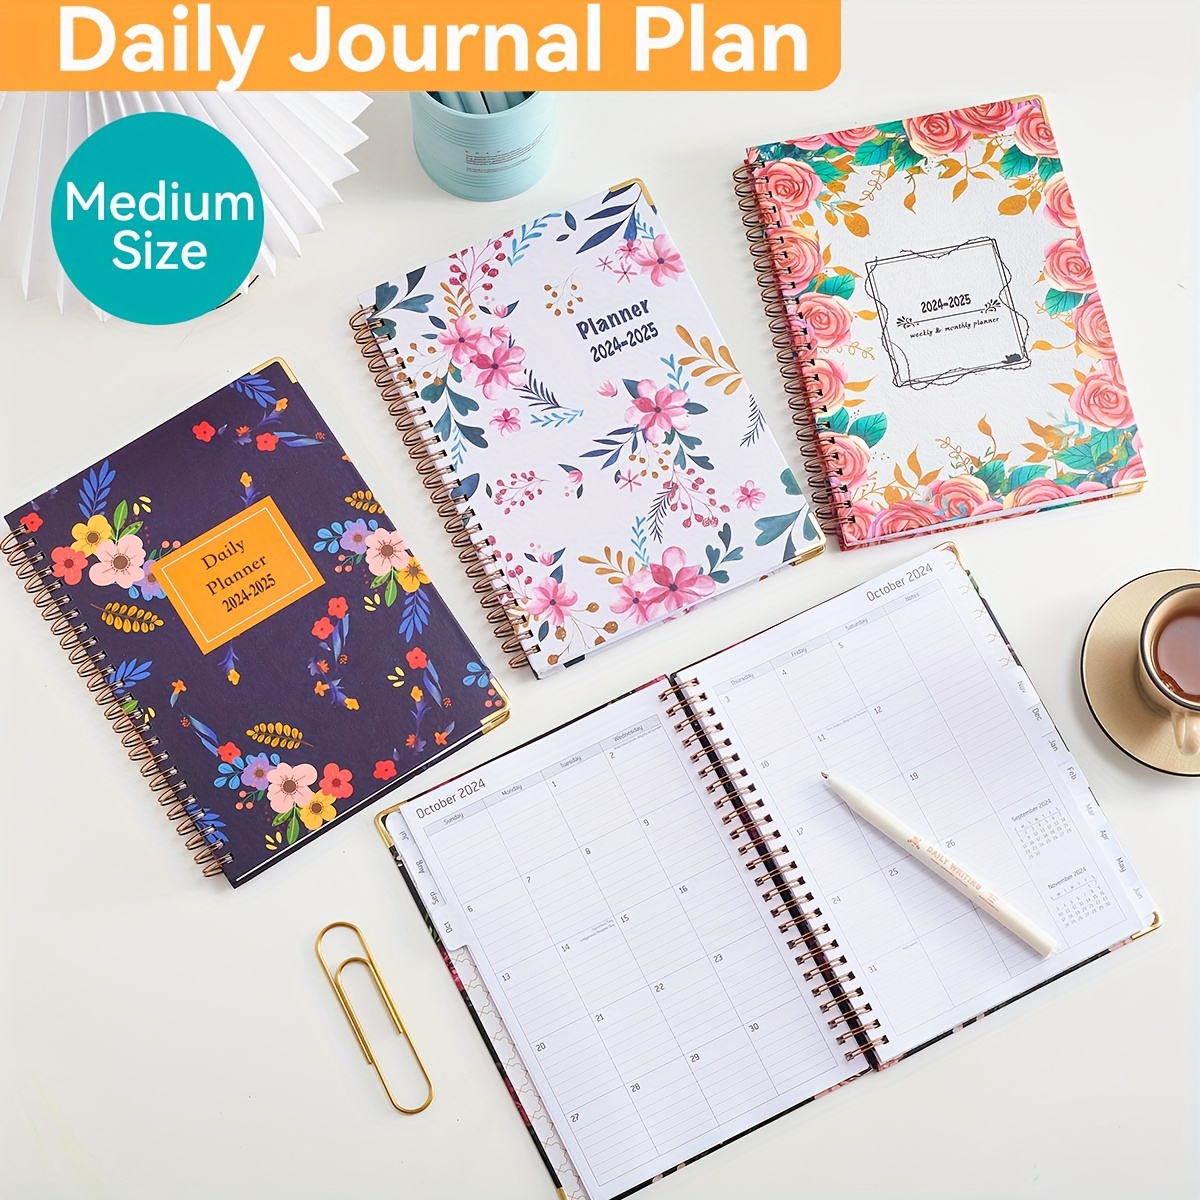 

24-25 Daily Planner-weekly & Monthly Planner Spiral Bound, Jul 2024 - Jun 2025, Hardcover, Monthly Tabs, Note Page, Inner Pocket. Twin-wire Binding, Daily Journal Plan For Offices&teachers.